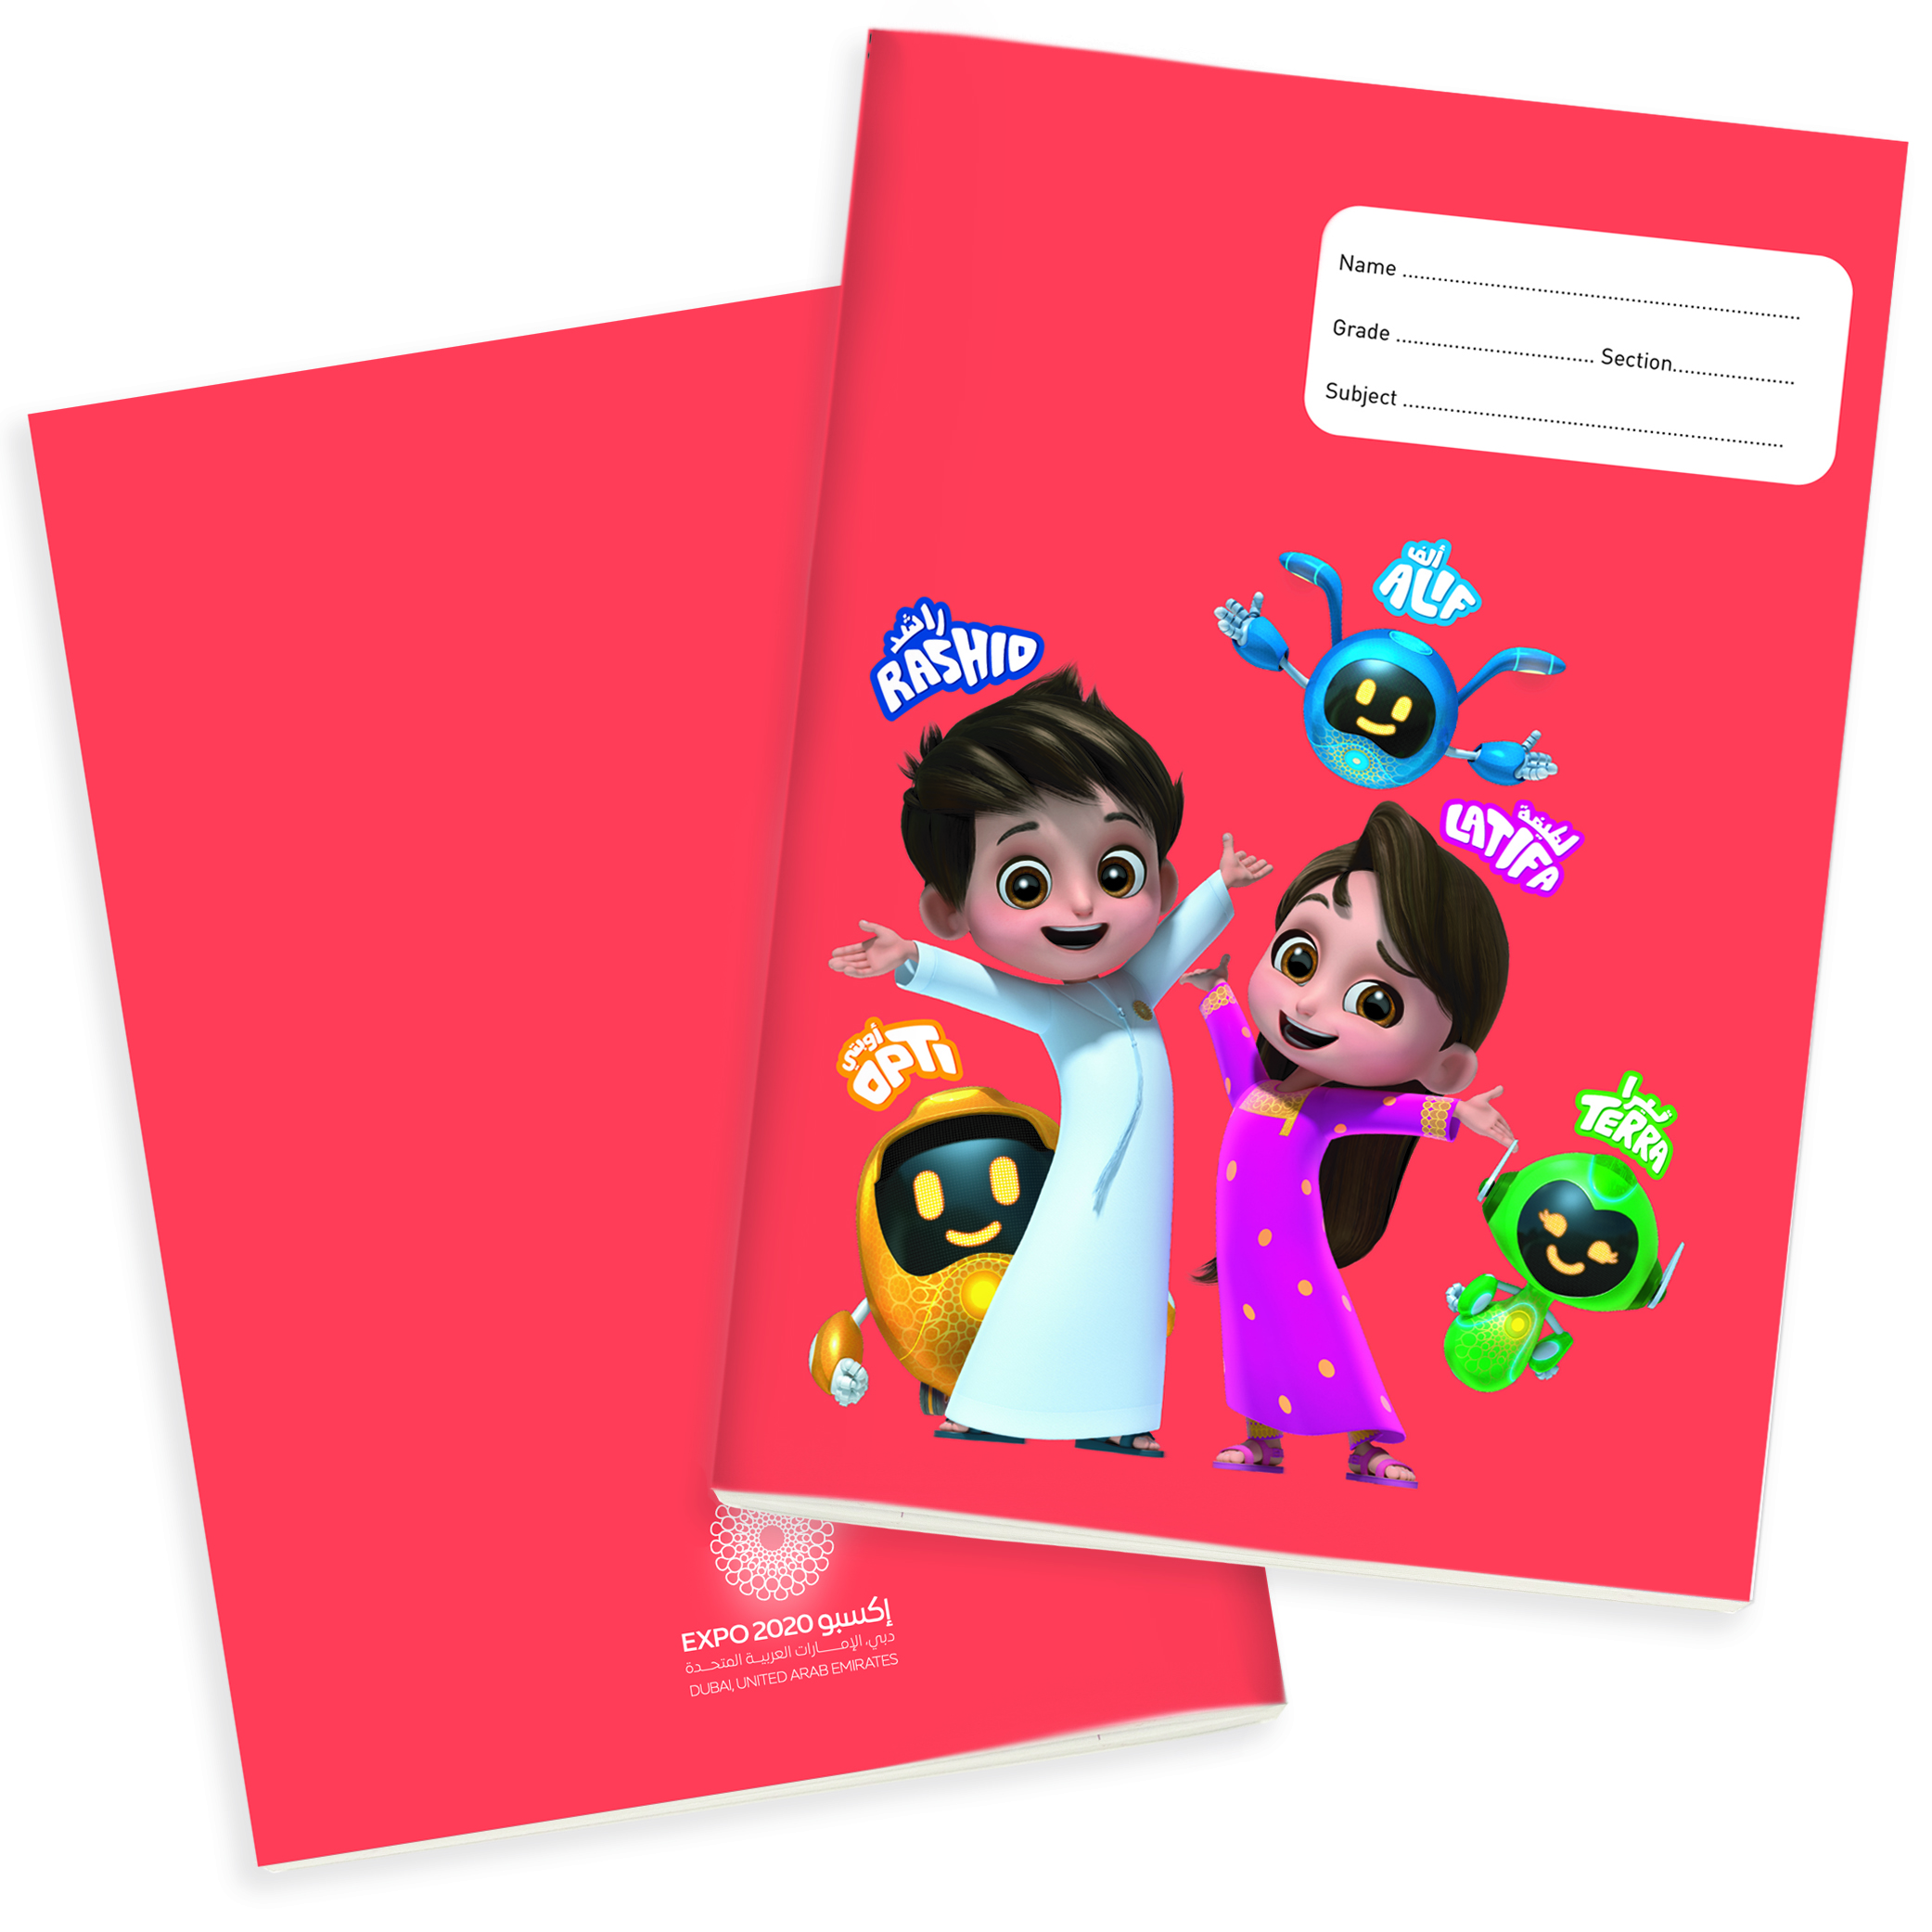 Expo 2020 Dubai Mascots A4 Exercise Books Pack of 4 - 64 Pages